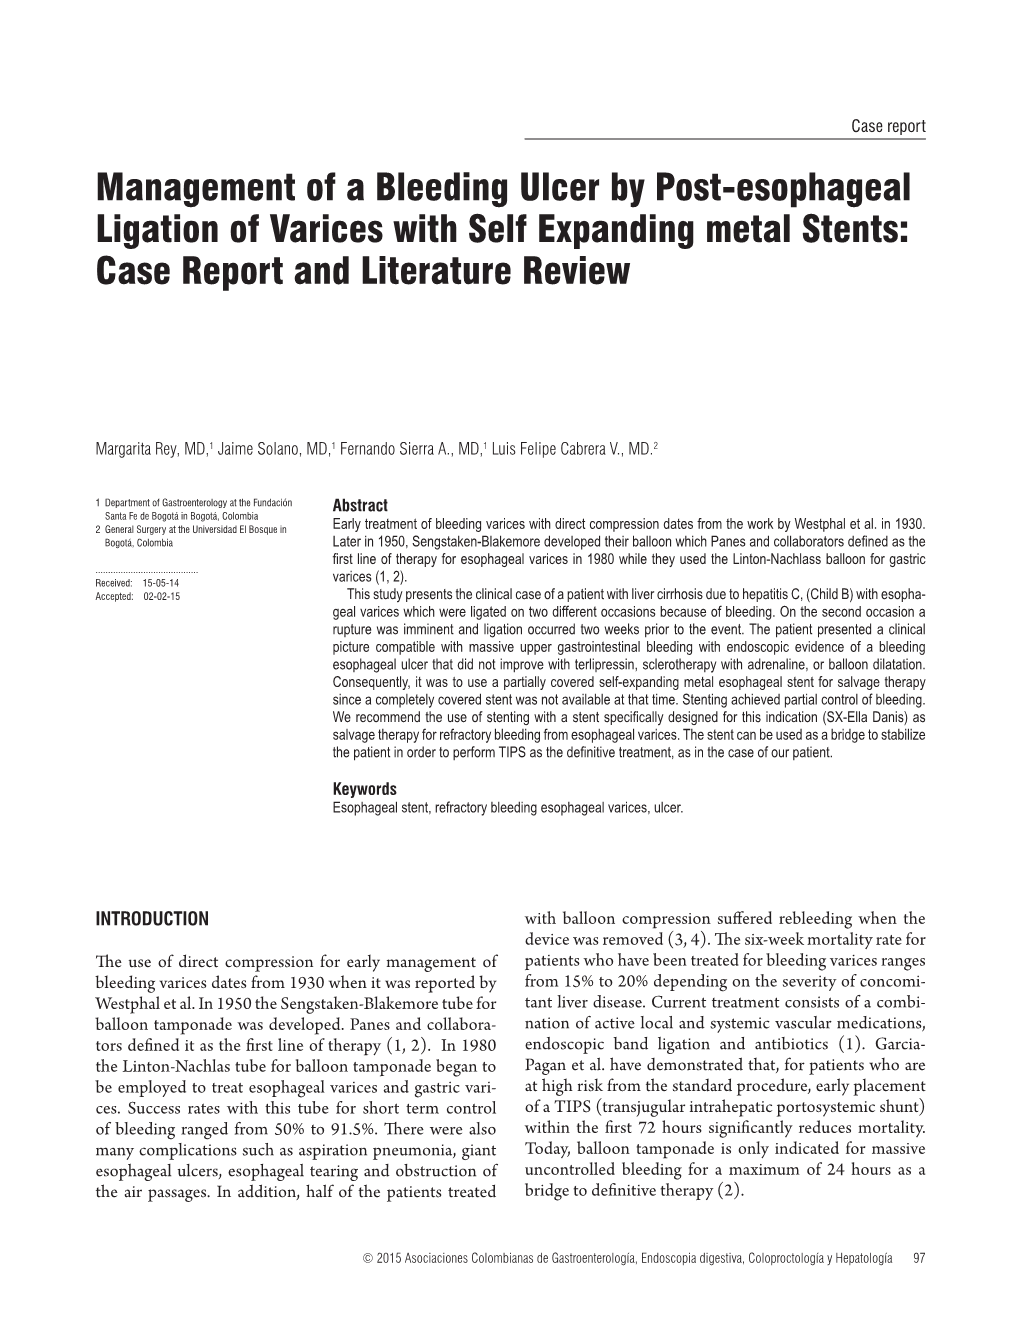 Management of a Bleeding Ulcer by Post-Esophageal Ligation of Varices with Self Expanding Metal Stents: Case Report and Literature Review